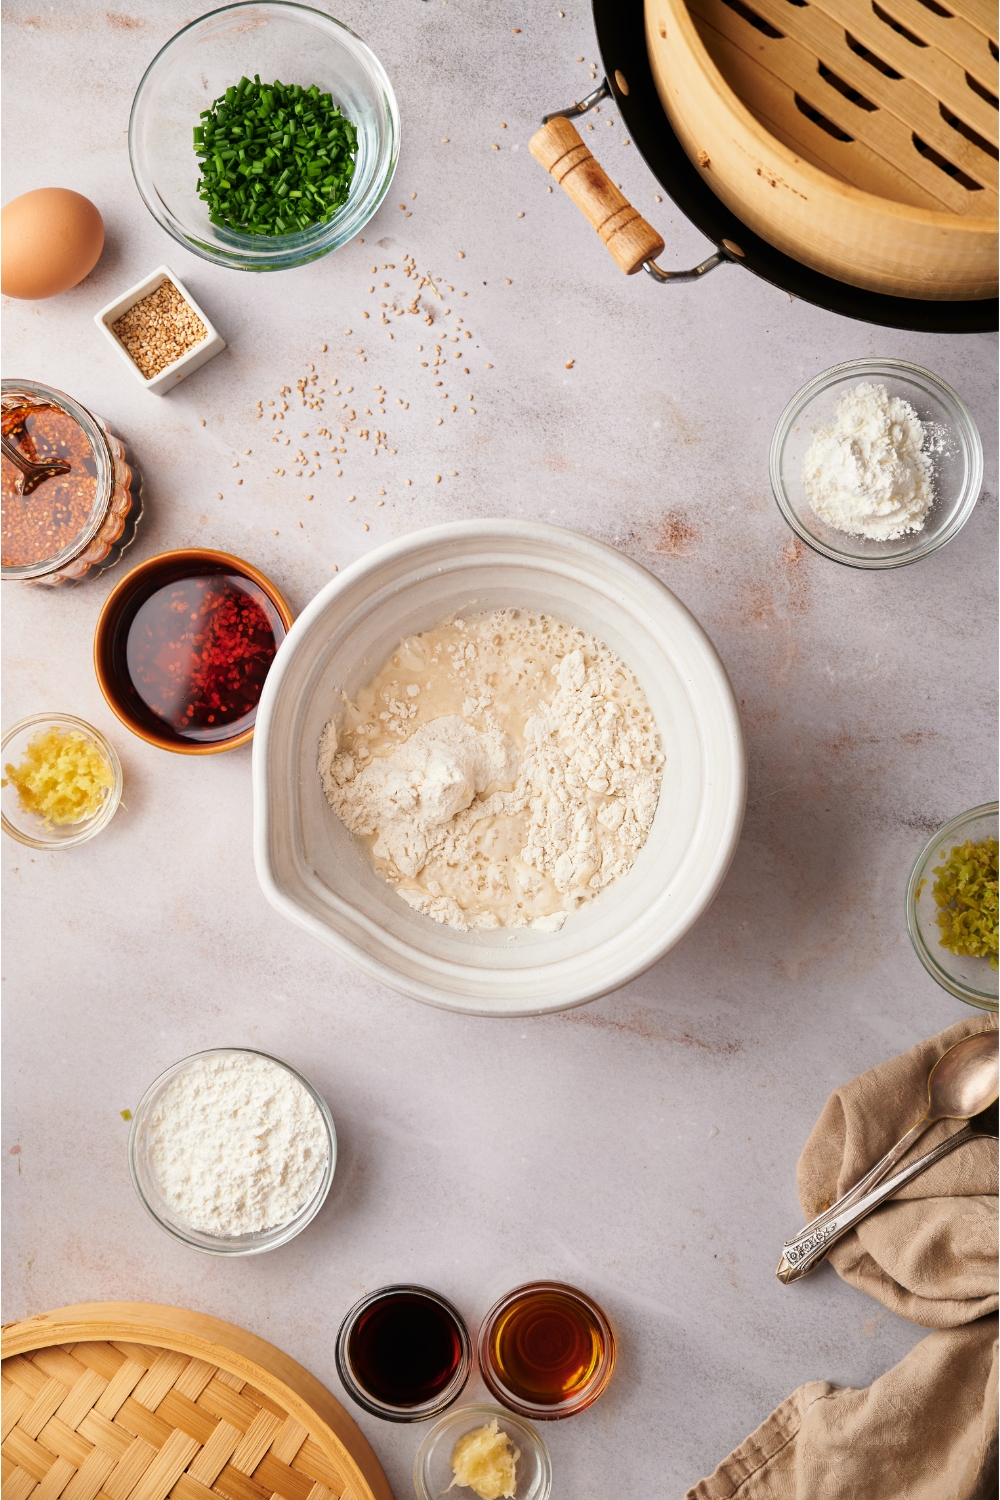 A white mixing bowl with a flour mixture, surrounded by bowls of ingredients including chili oil, garlic, sesame oil, and sesame seeds.